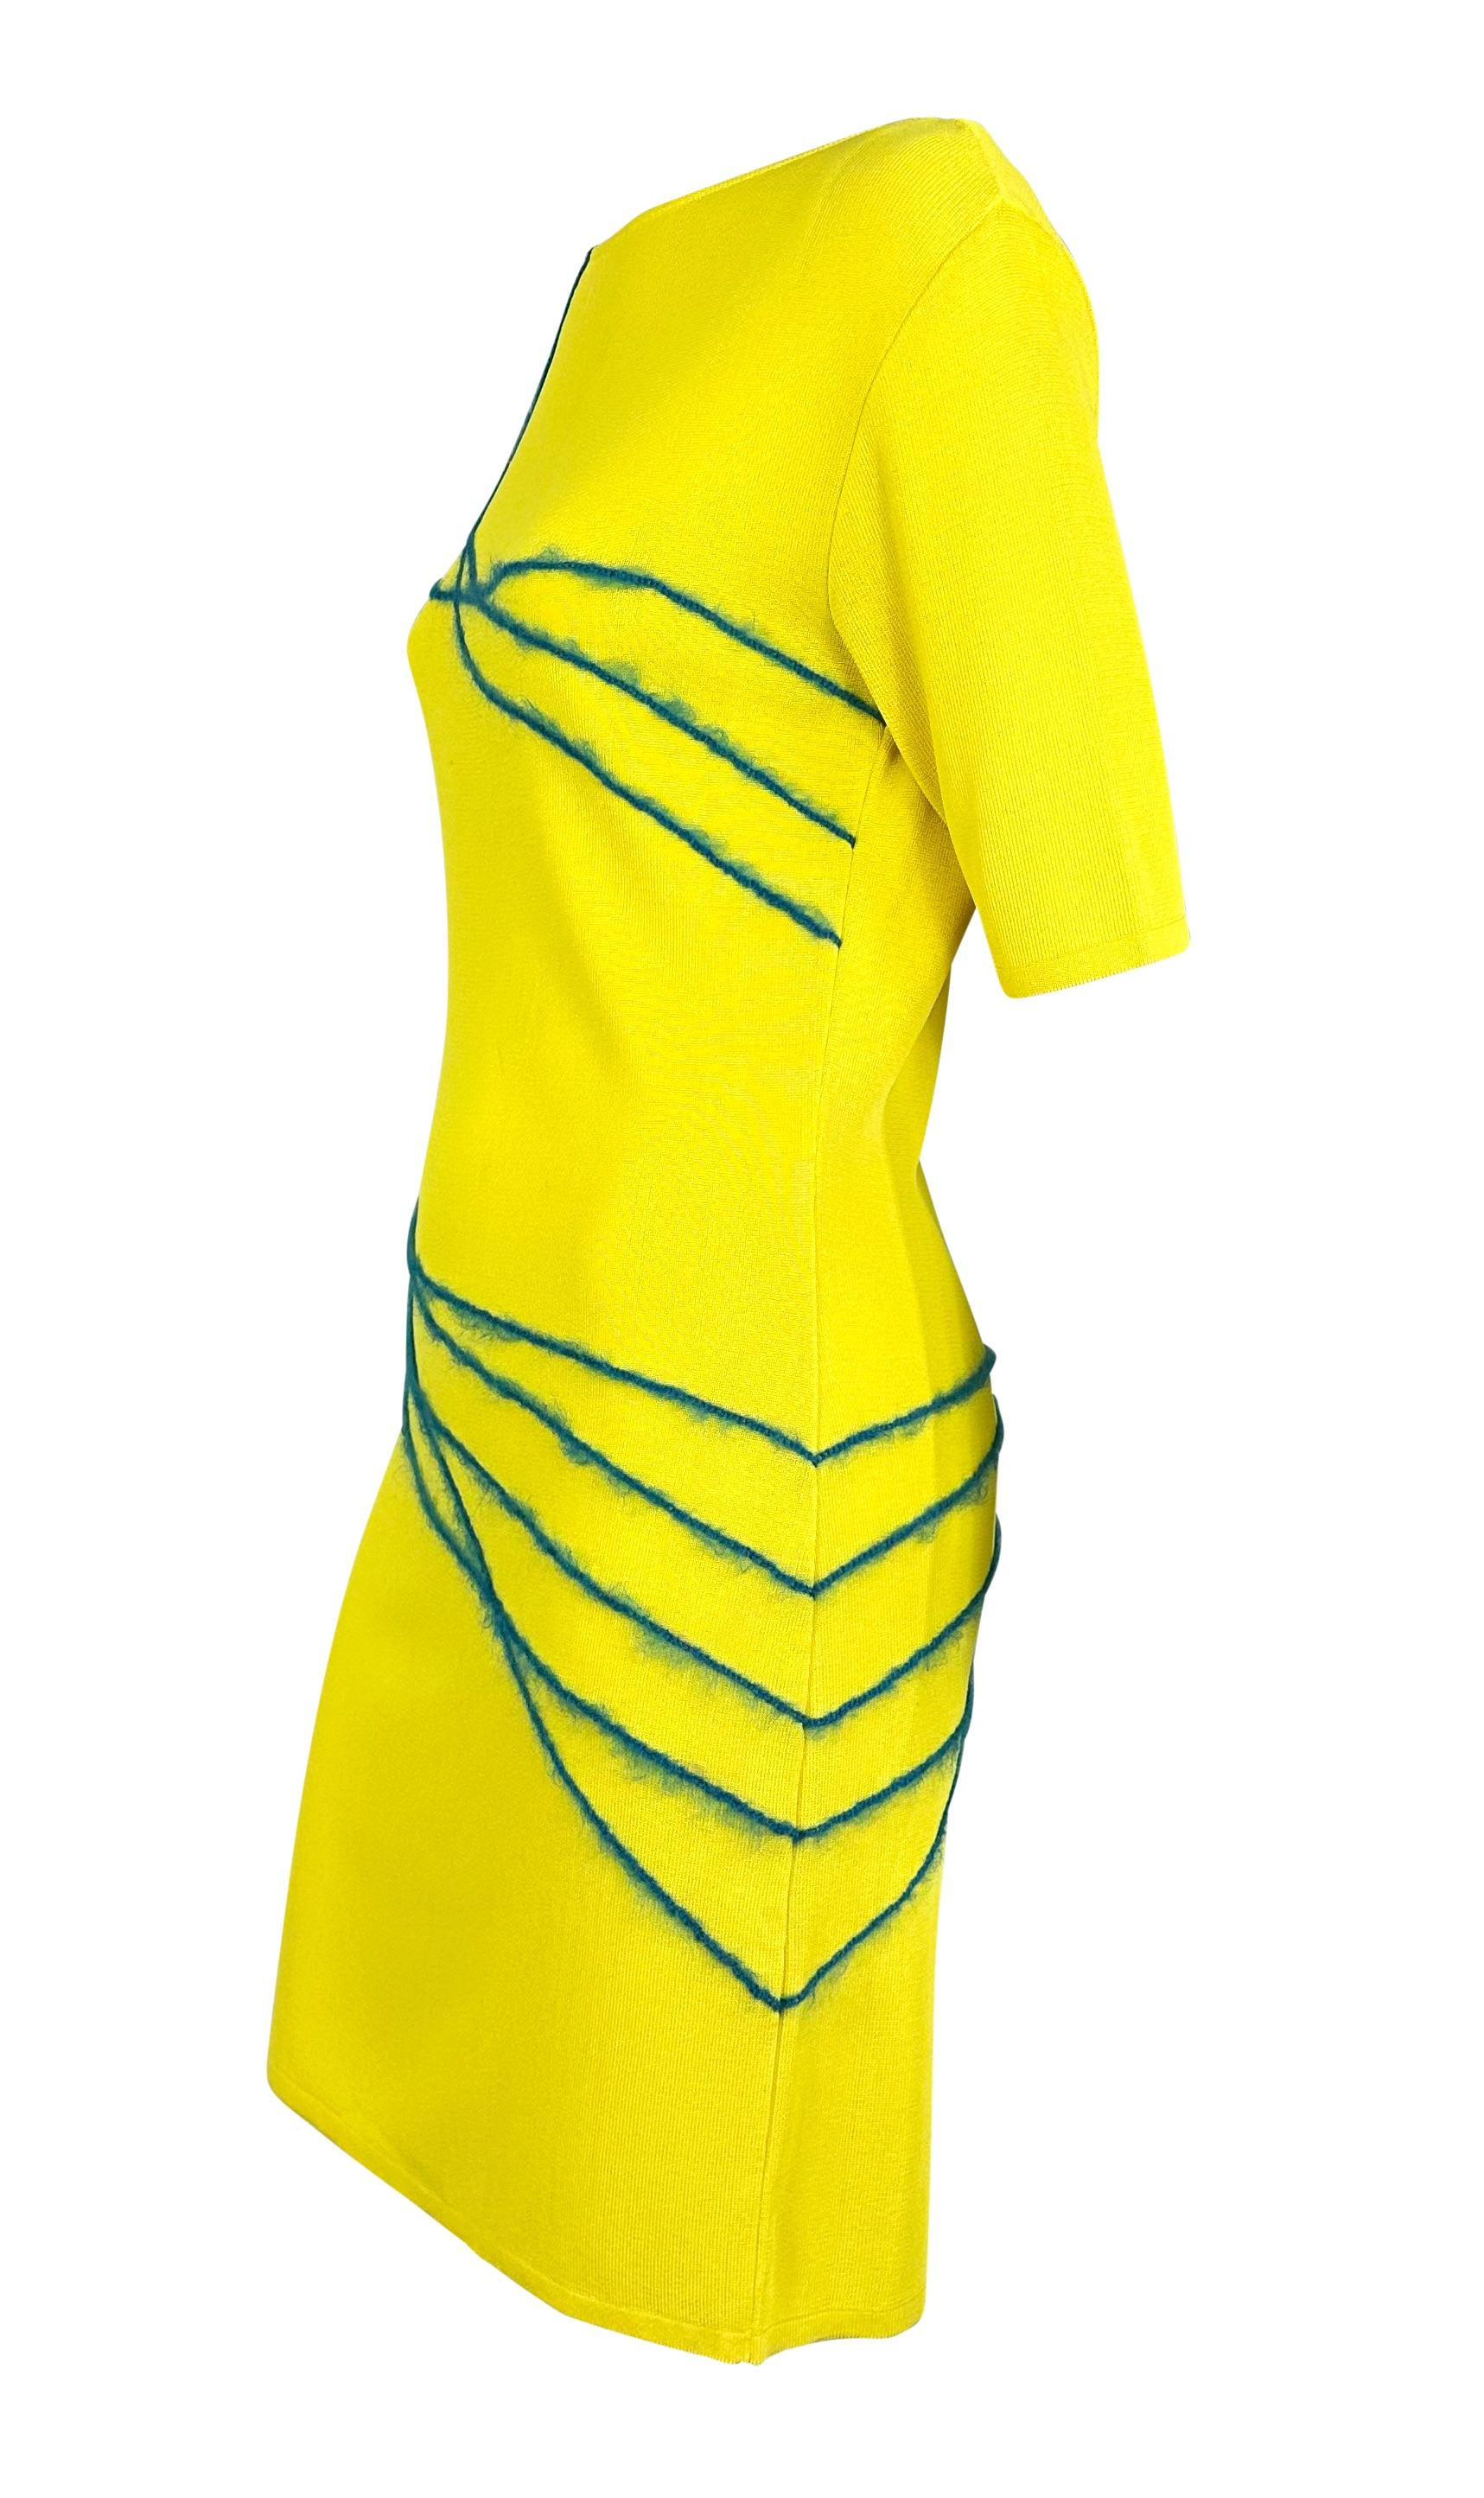 NWT S/S 1998 Gianni Versace by Donatella Yellow Knit Dress In Excellent Condition For Sale In West Hollywood, CA